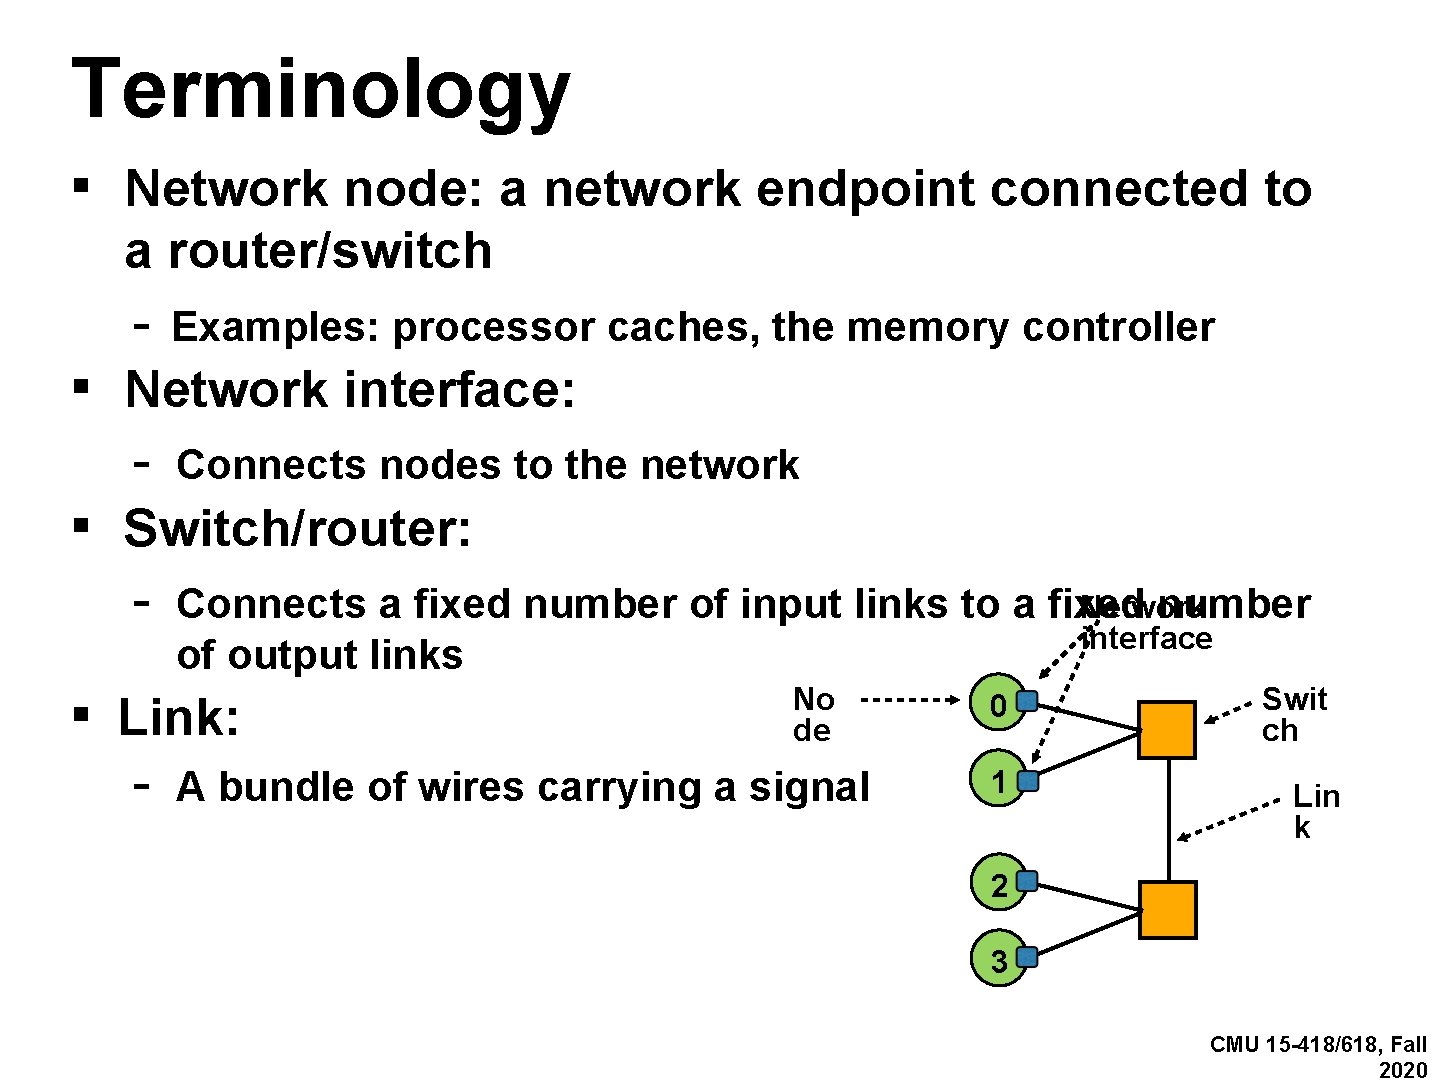 Terminology ▪ Network node: a network endpoint connected to a router/switch - Examples: processor